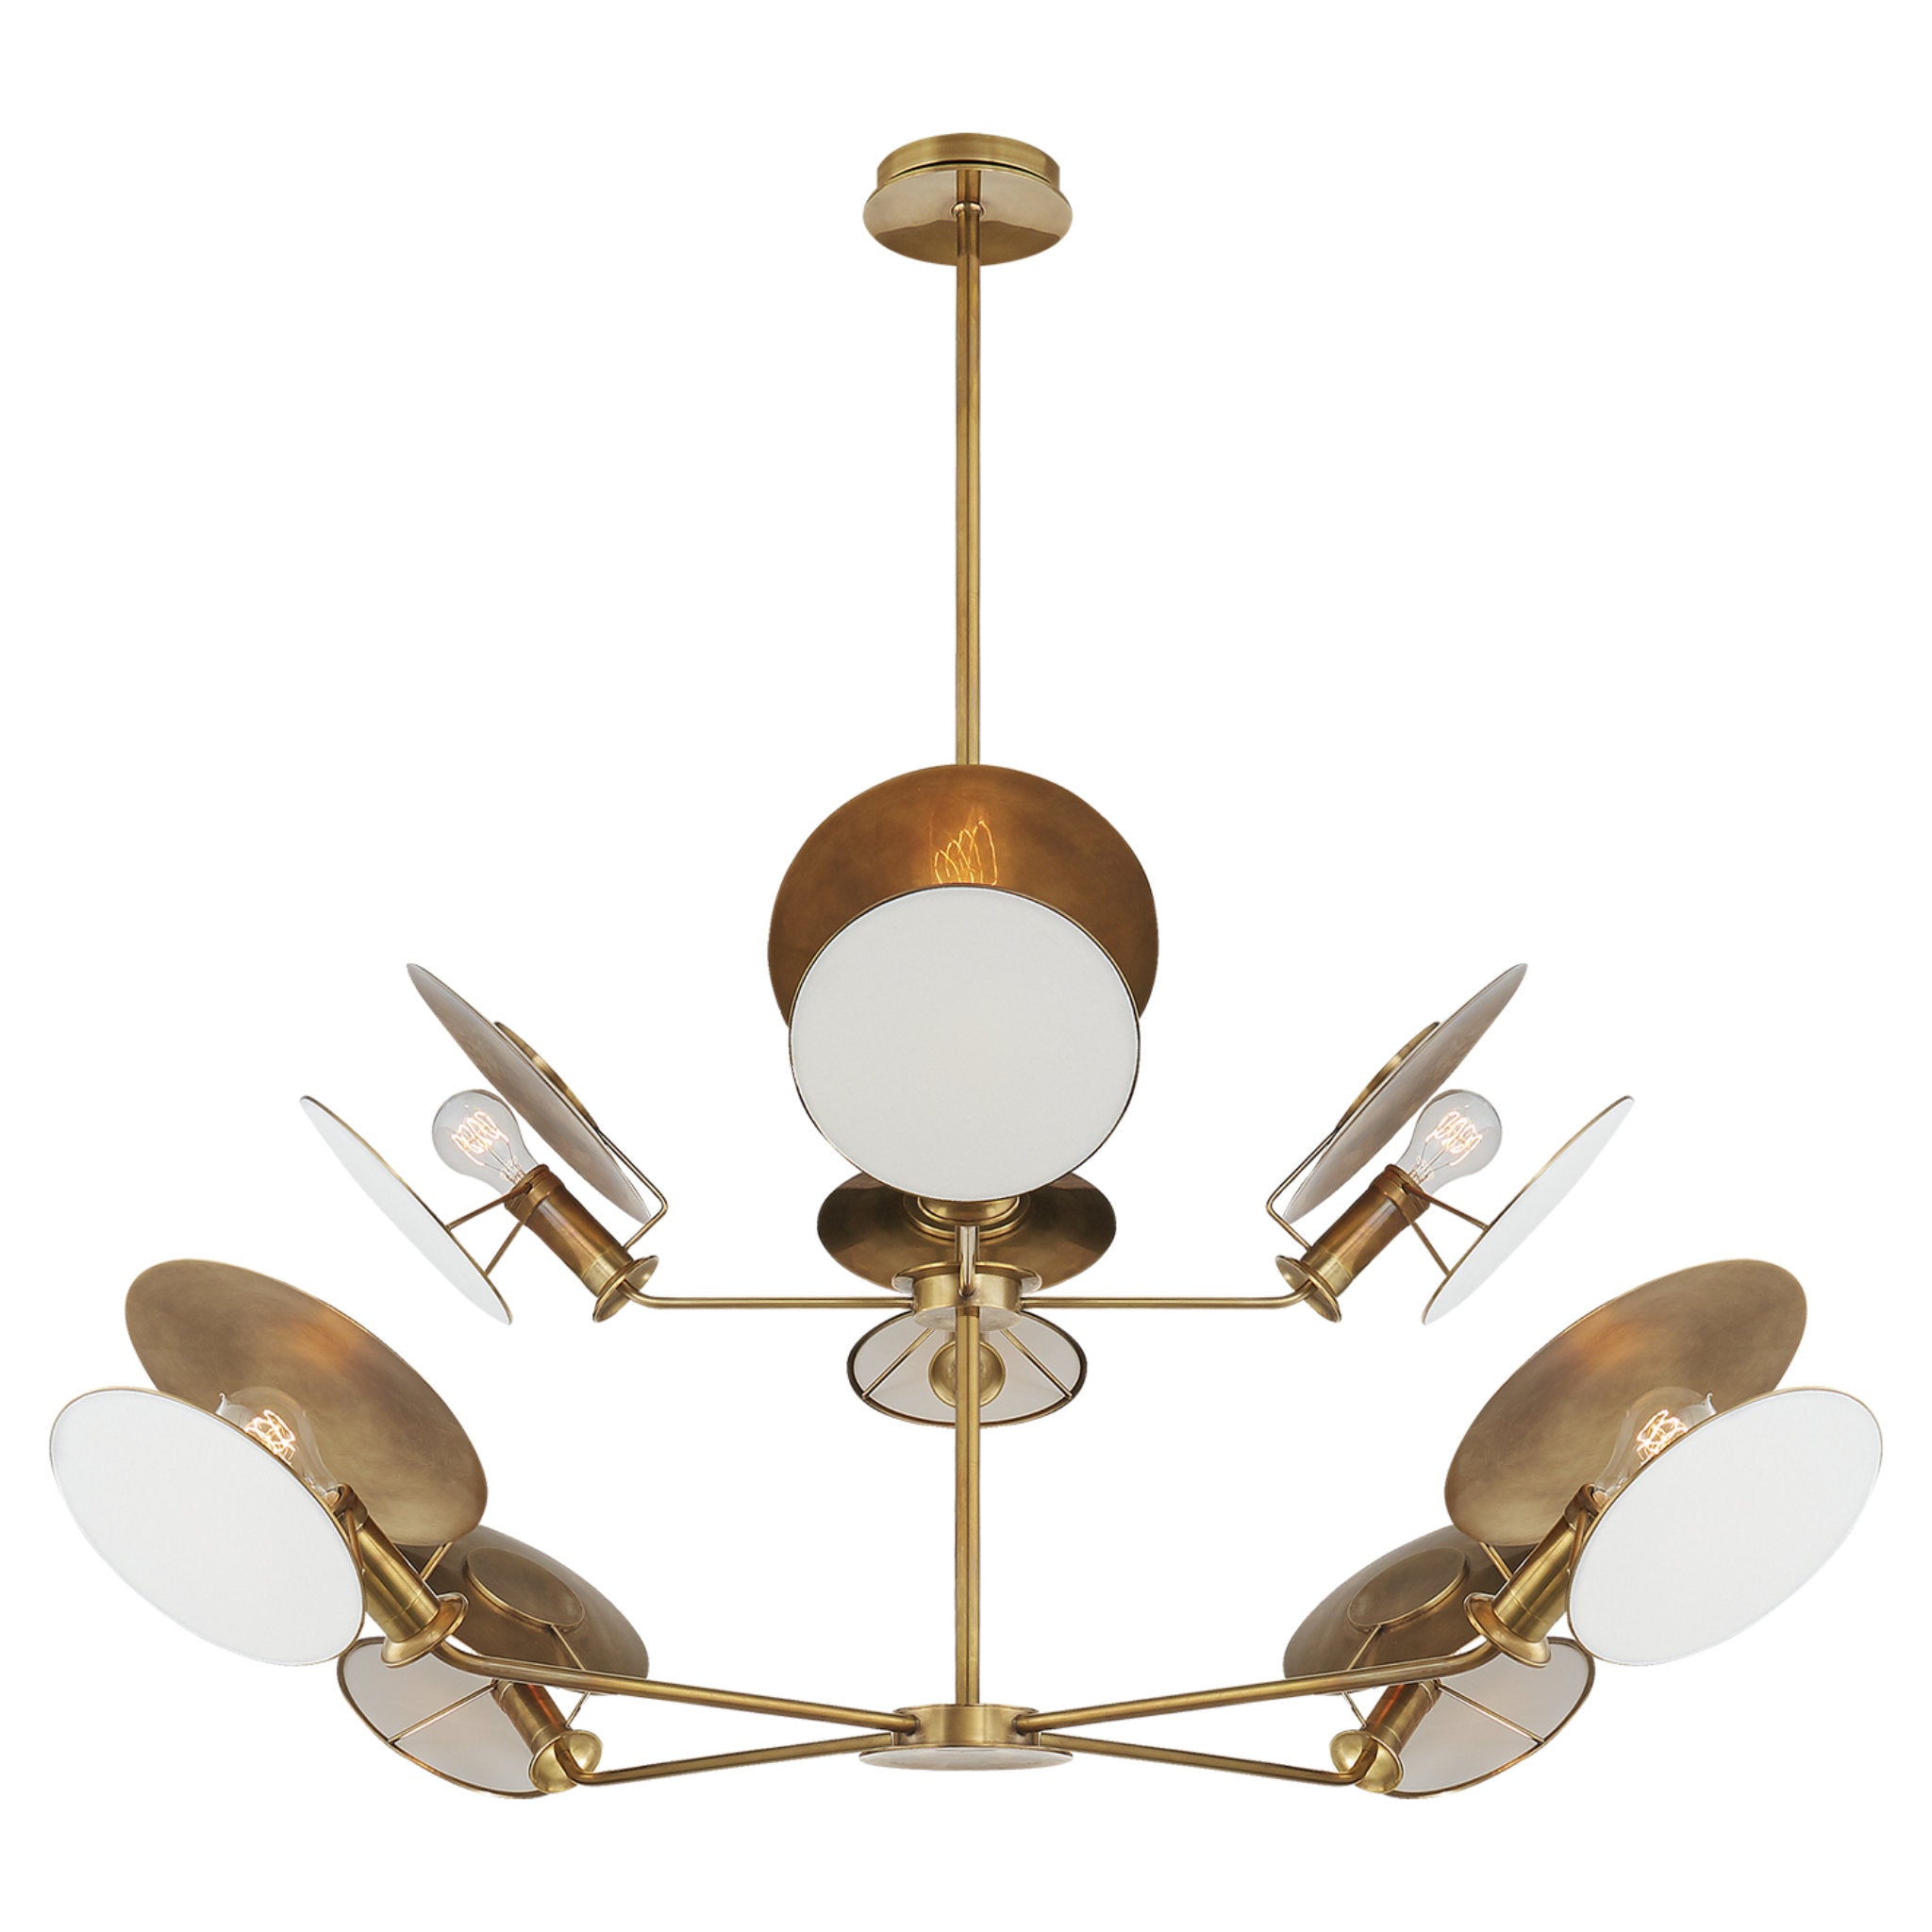 Thomas O'Brien Osiris Large Reflector Chandelier in Hand-Rubbed Antique  Brass with Linen Diffuser